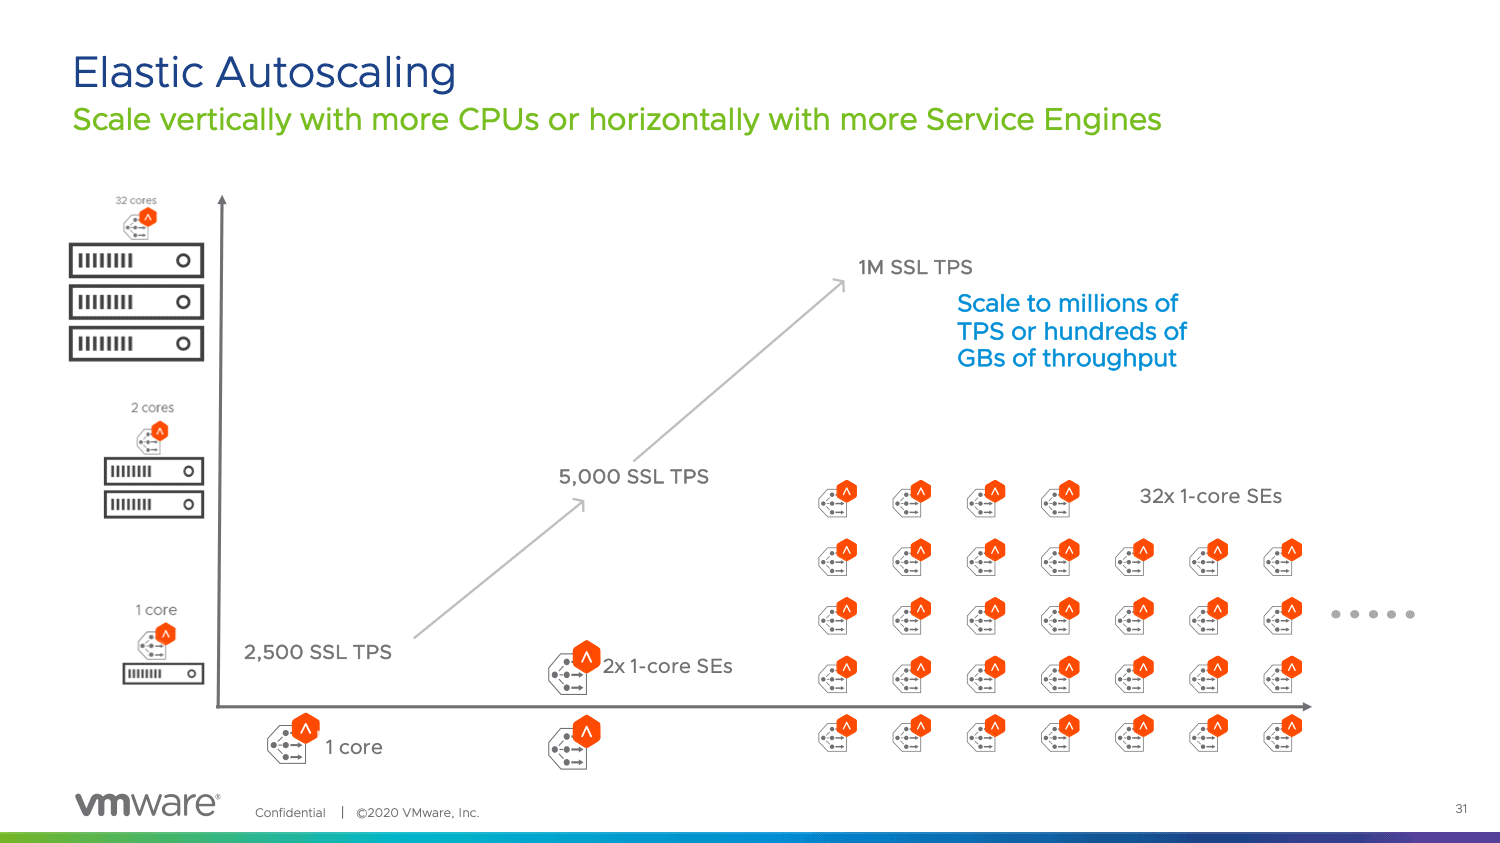 Graph shows how VMware elastic autoscaling can scale vertically with more CPUs or horizontally with more Service Engines.